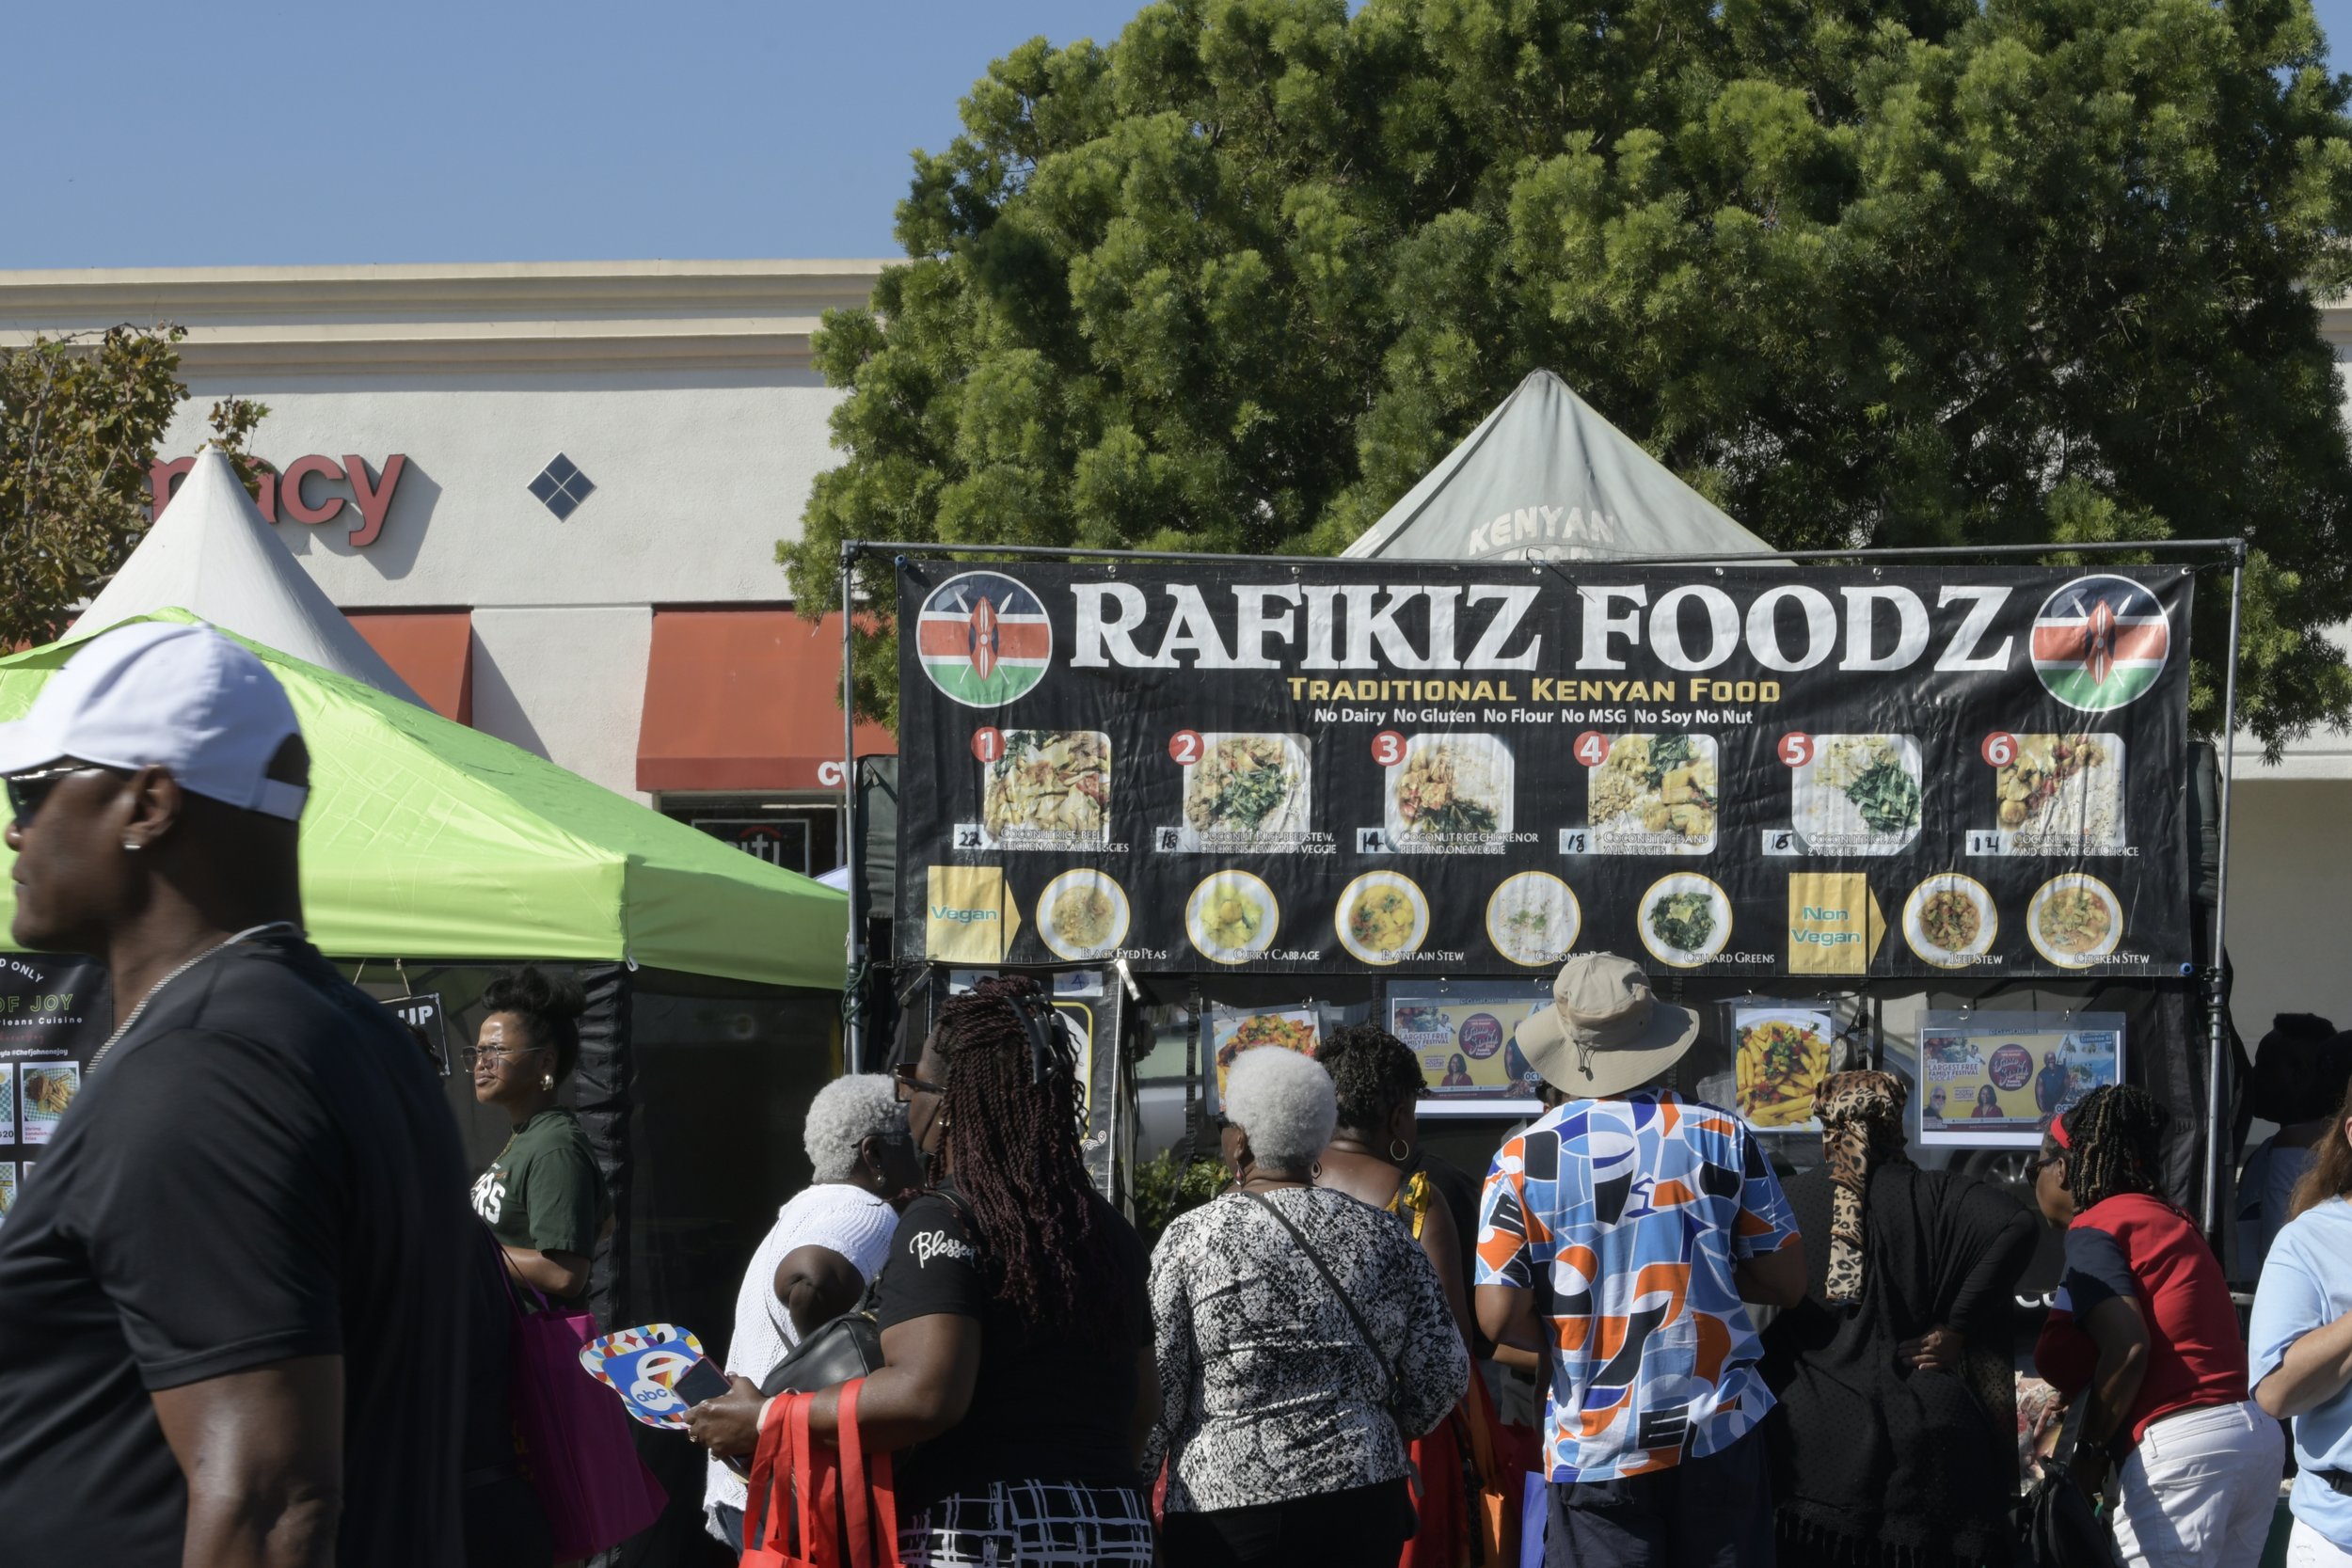  Rafikiz Foodz, from San Diego, serves up traditional Kenyan food with vegan and non-vegan options. (Mikey Duro | The Corsair) 